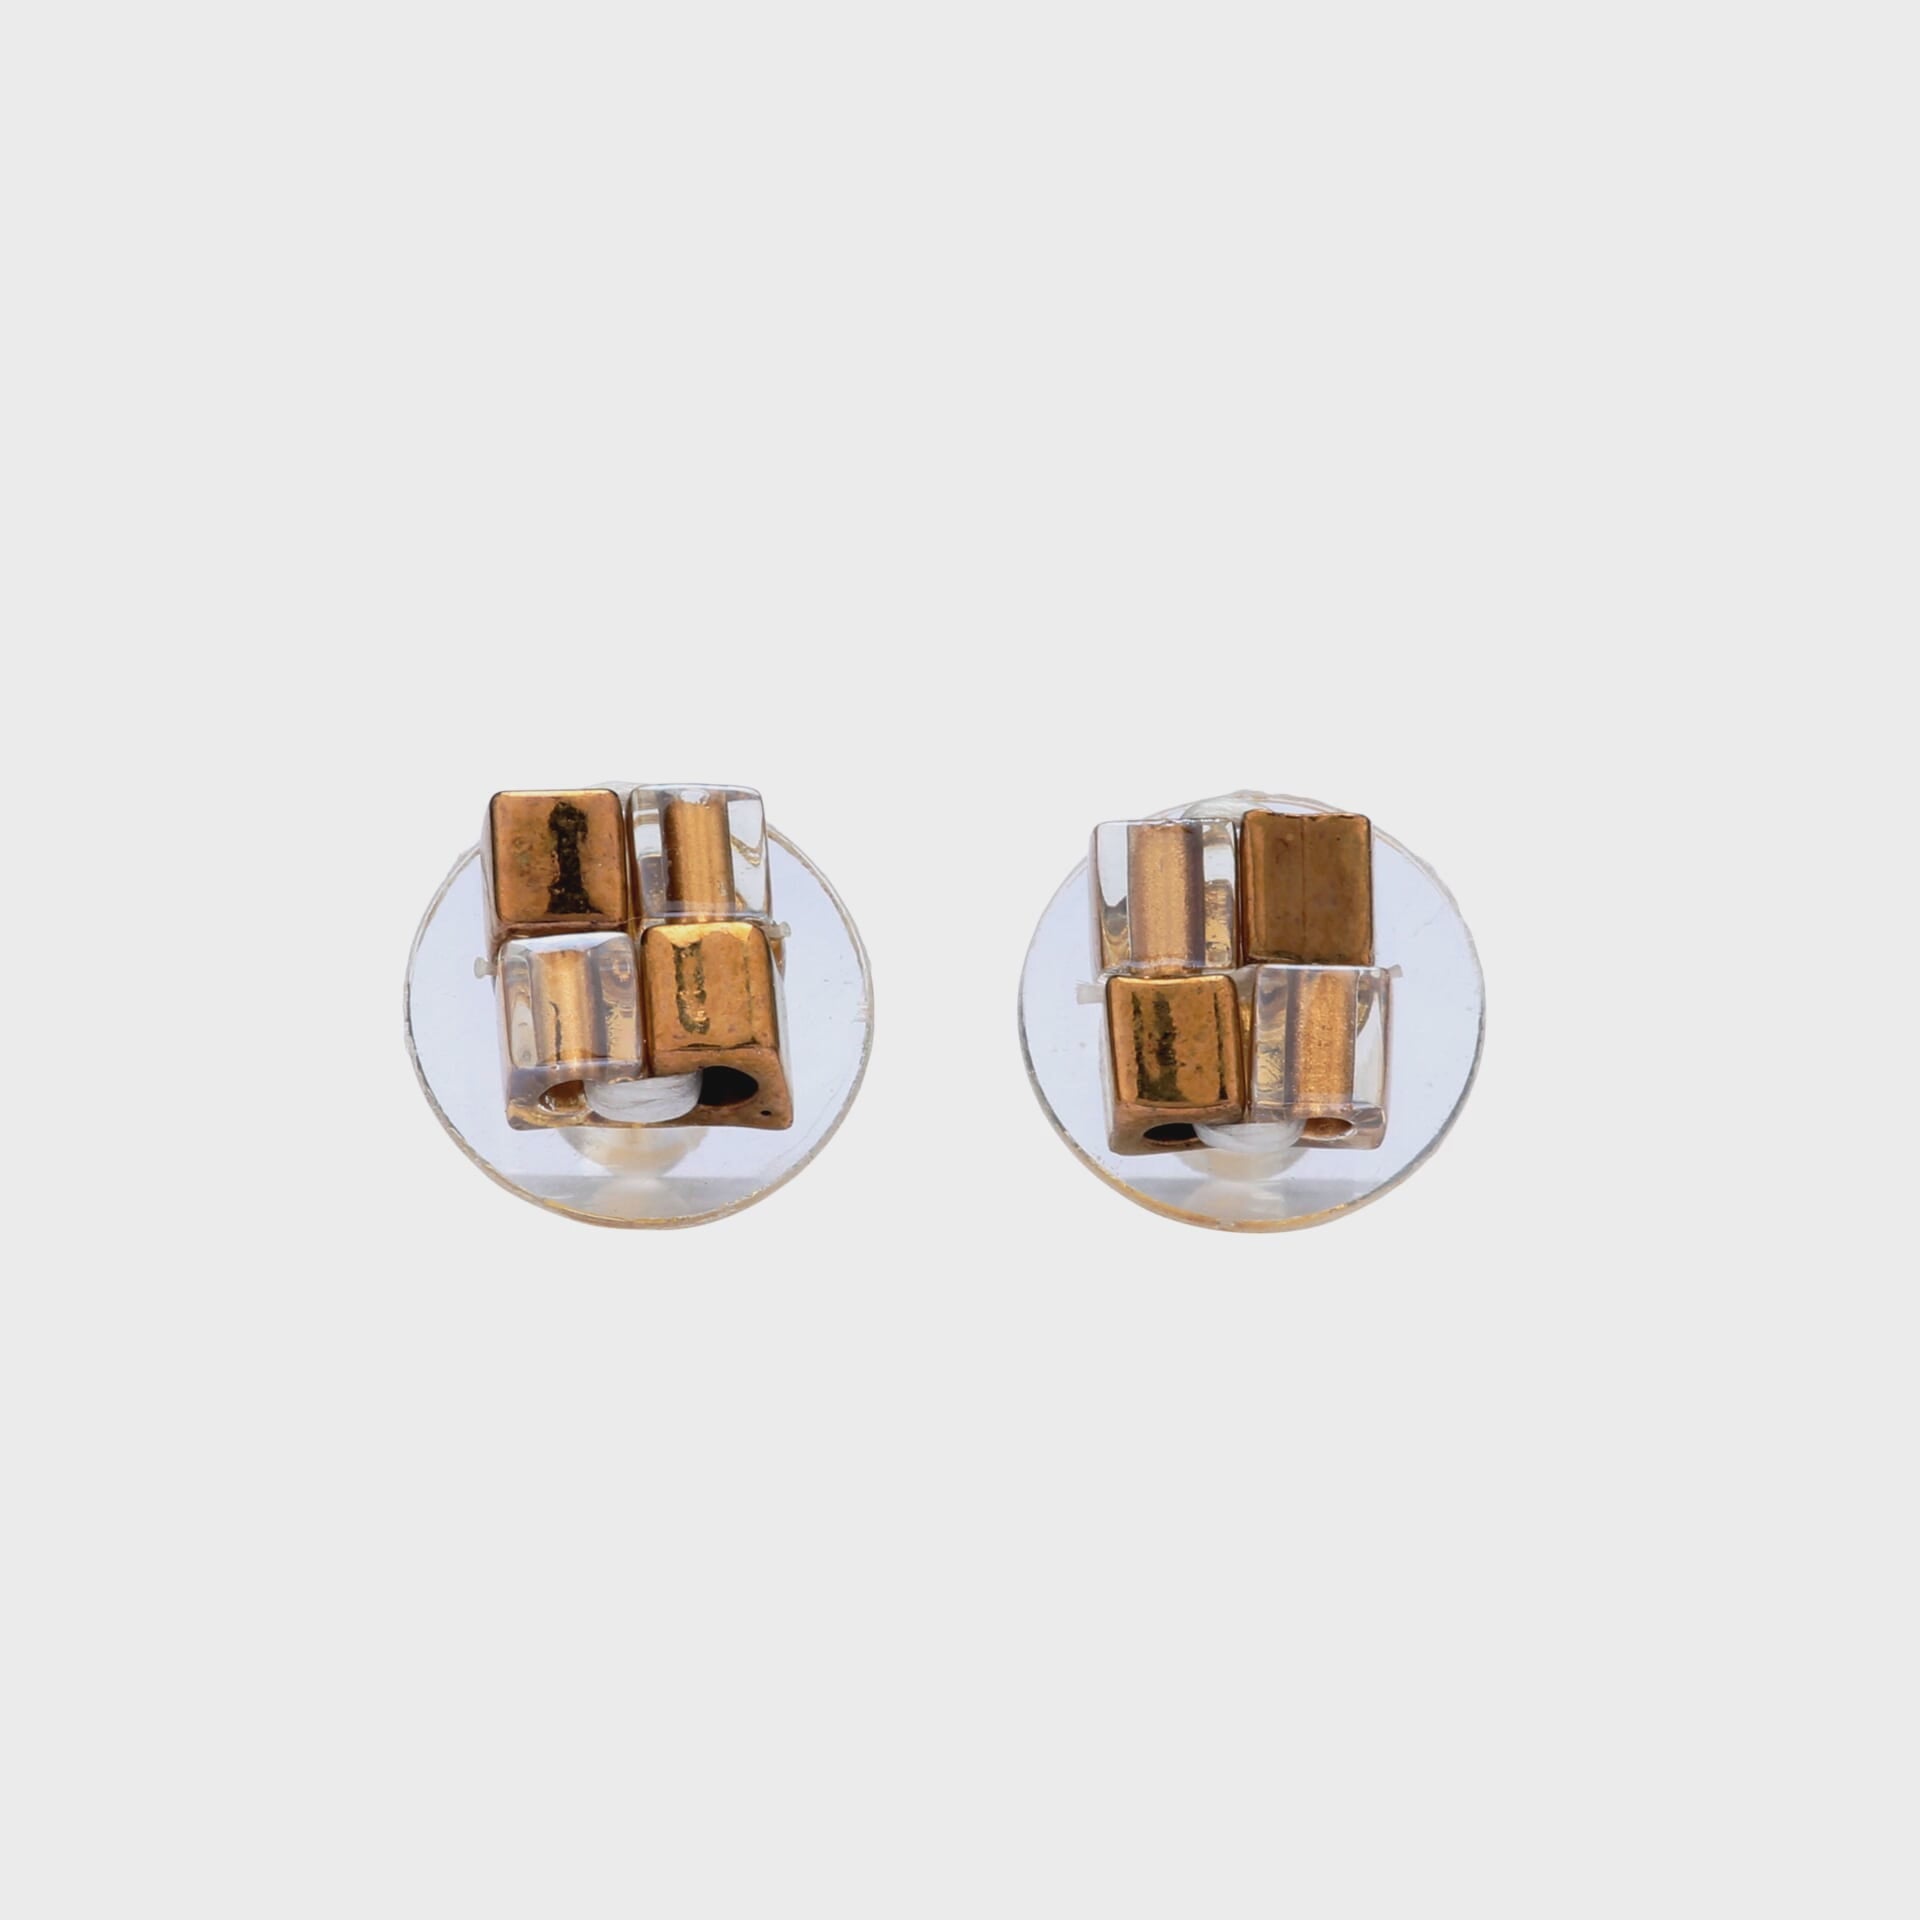 This is a short video showing a 360 degree view of the square earrings with the backs attached.